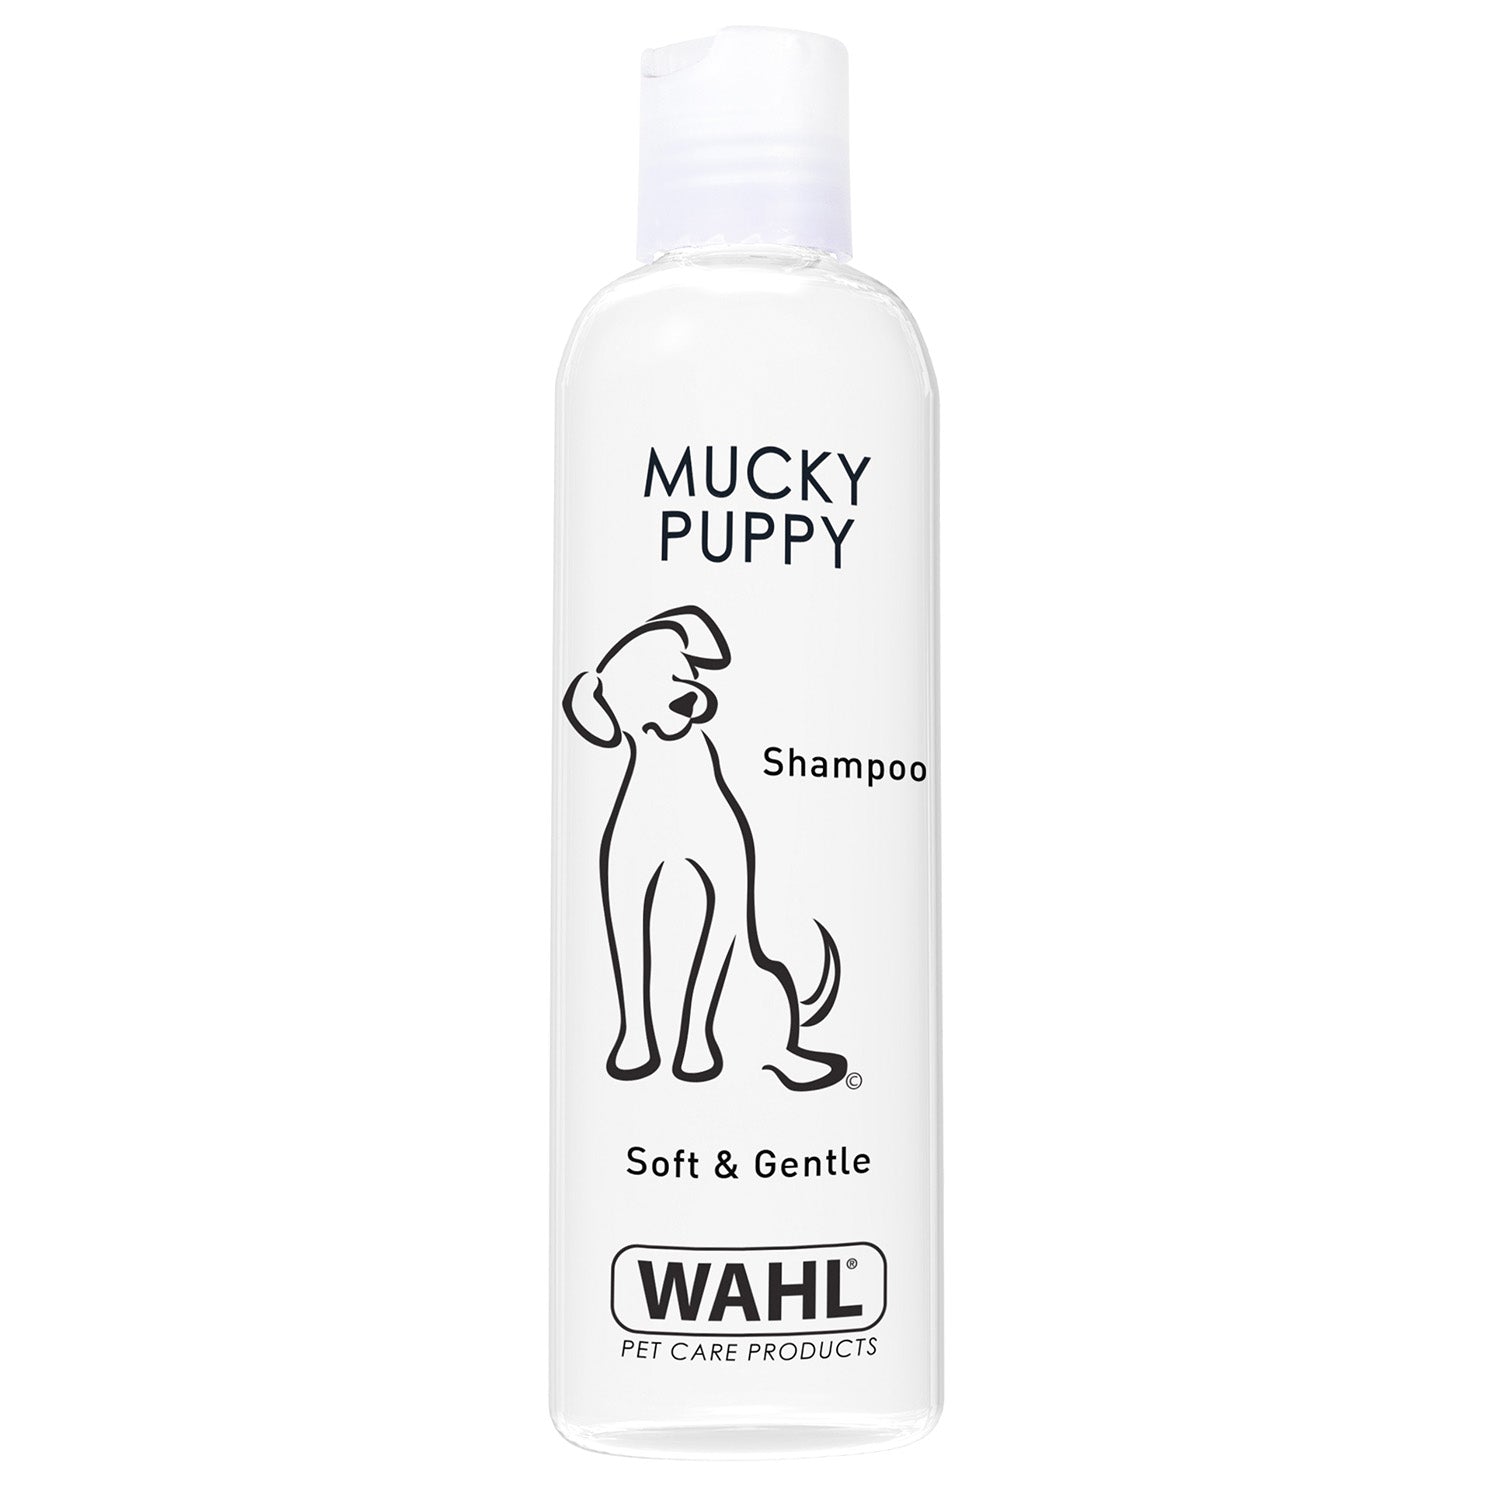 Wahl Pet Care Mucky Puppy Shampoo